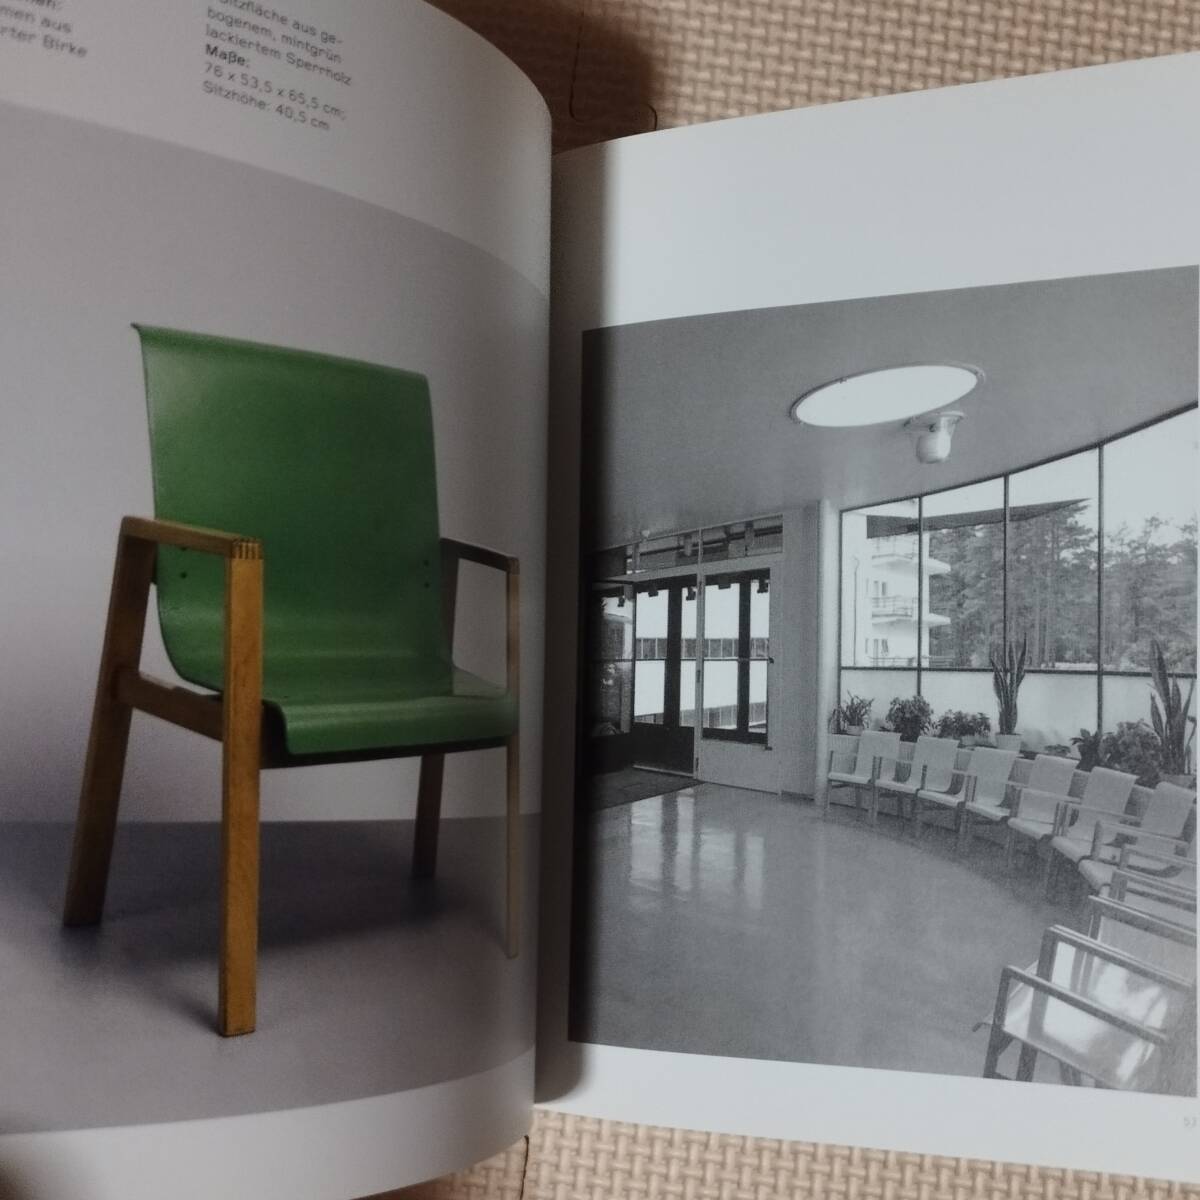 Alvar Aalto Objects and Furniture Design by Architects アルヴァ・アアルト 家具デザイン集 アルヴァ・アールト の画像6